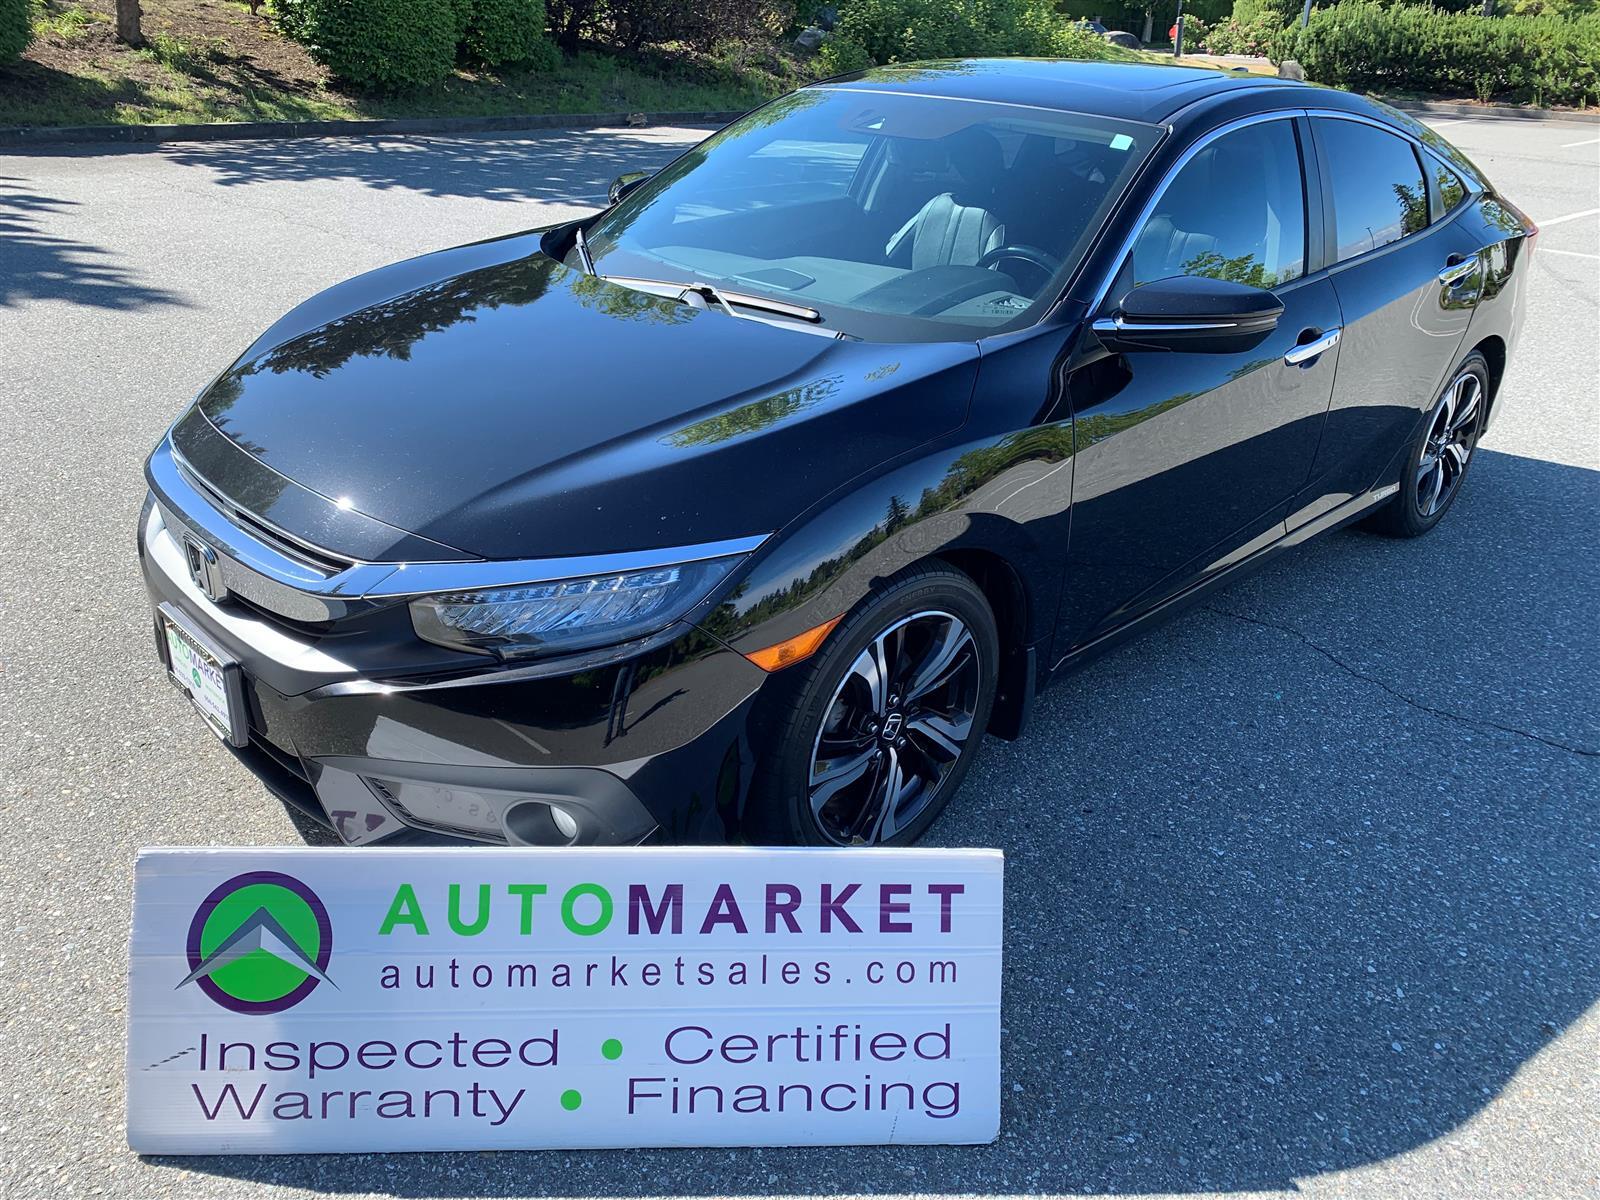 2016 Honda Civic TOURING, LOADED, FINANCING, WARRANTY, INSPECTED W/